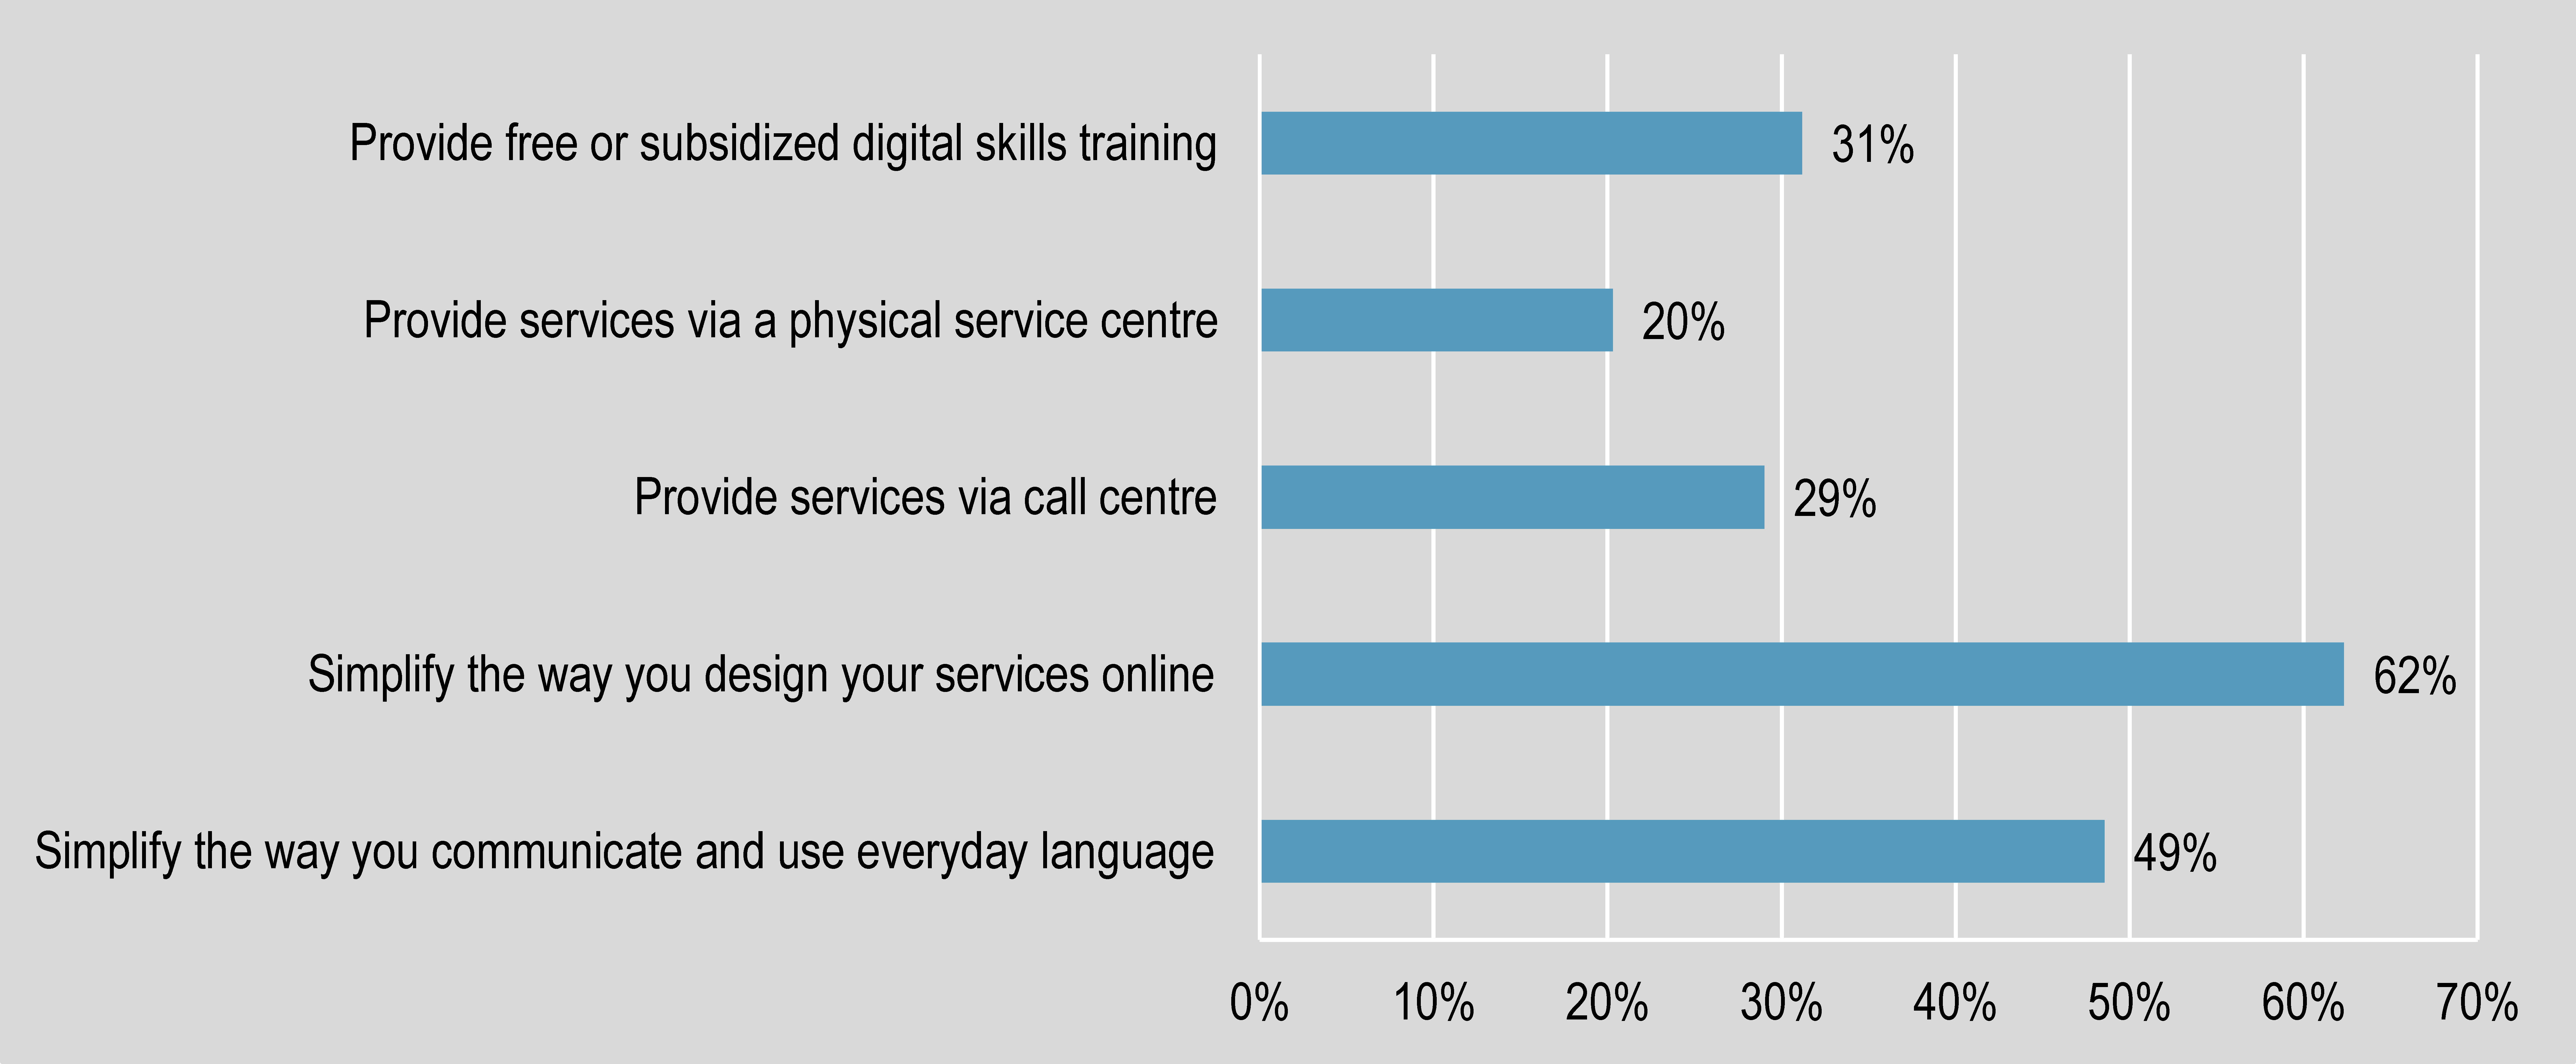 Figure 1. Top two strategies to overcome barriers to digital inclusion - Related to access